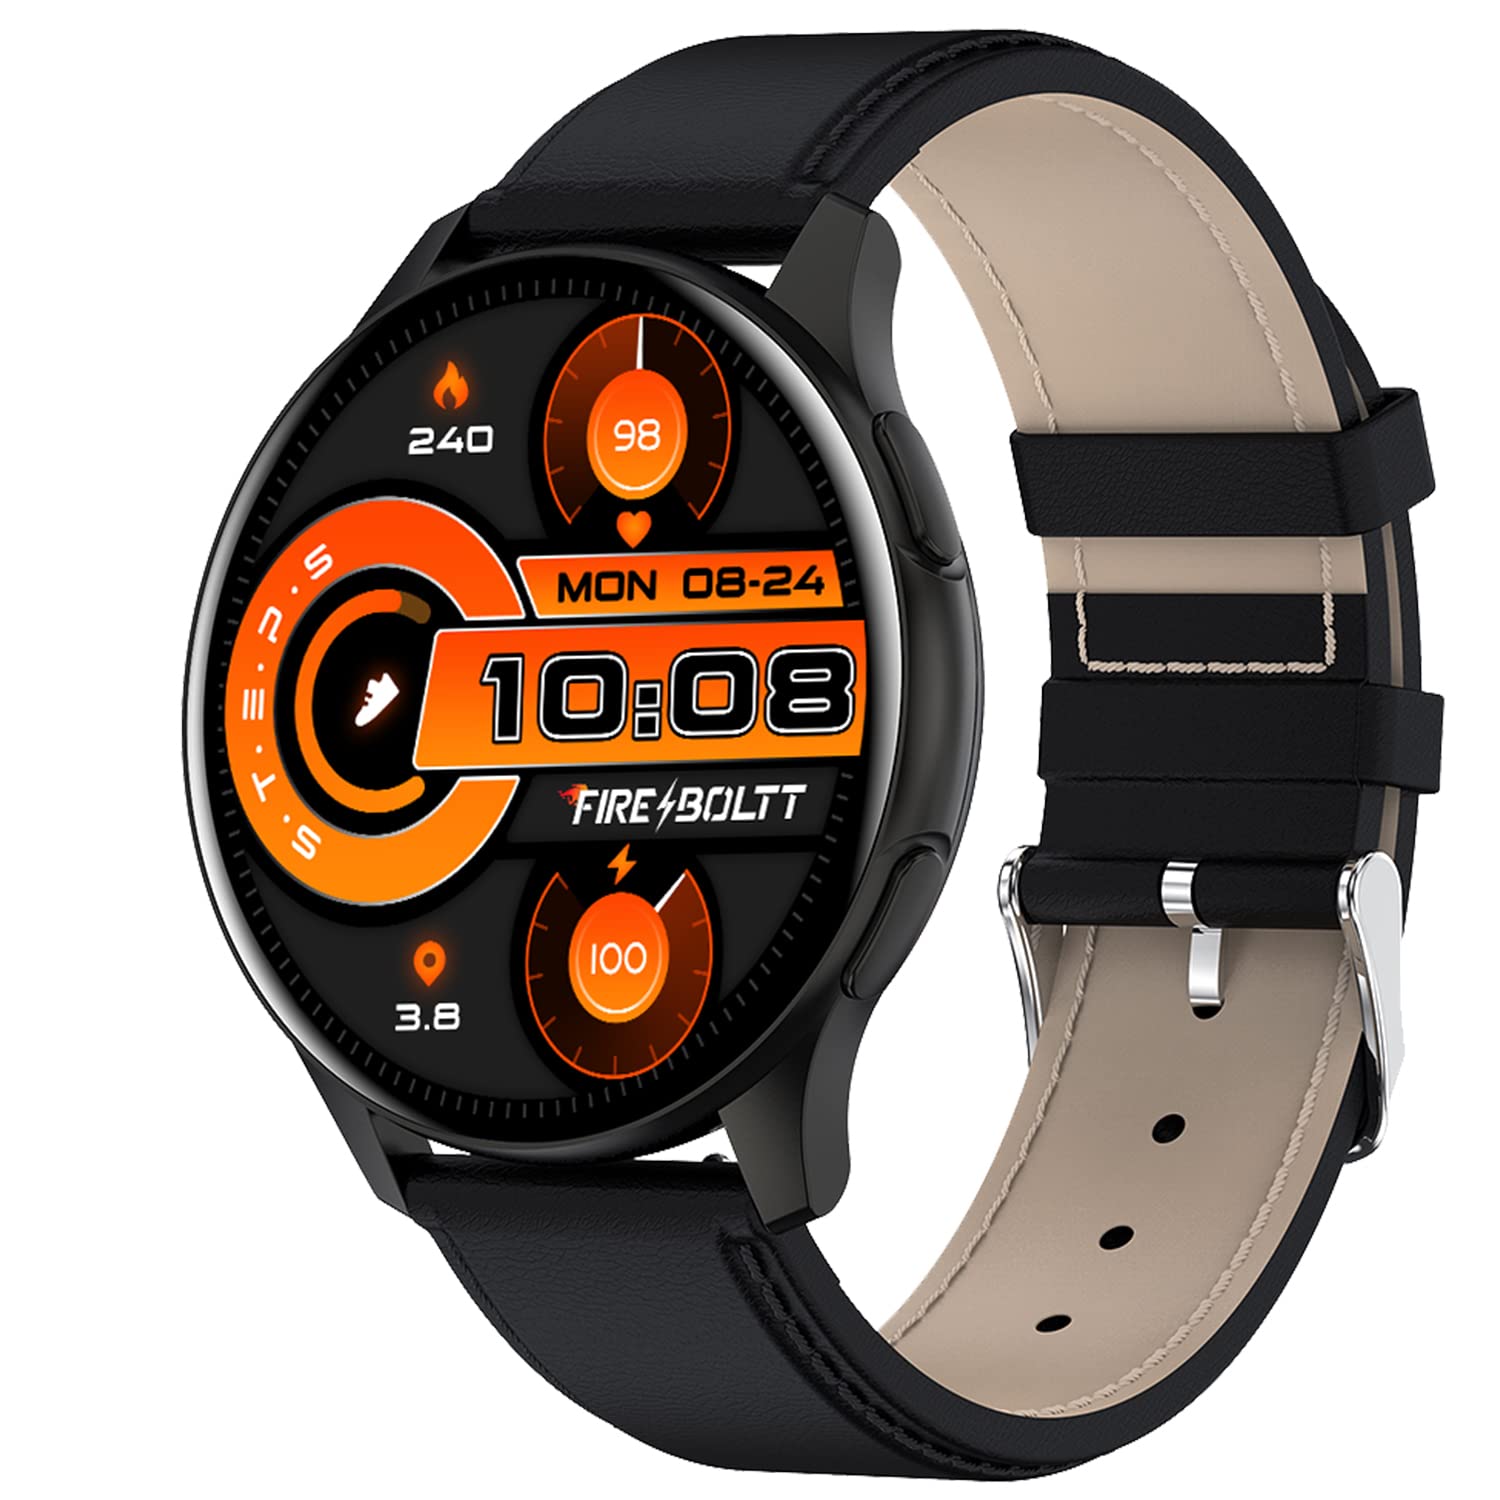 Fire-Boltt INVINCIBLE 1.39 inches AMOLED 454×454 Bluetooth Calling Smartwatch ALWAYS ON, 100 Sports Modes, 100 Inbuilt Watch Faces & 8GB (Jet Black)